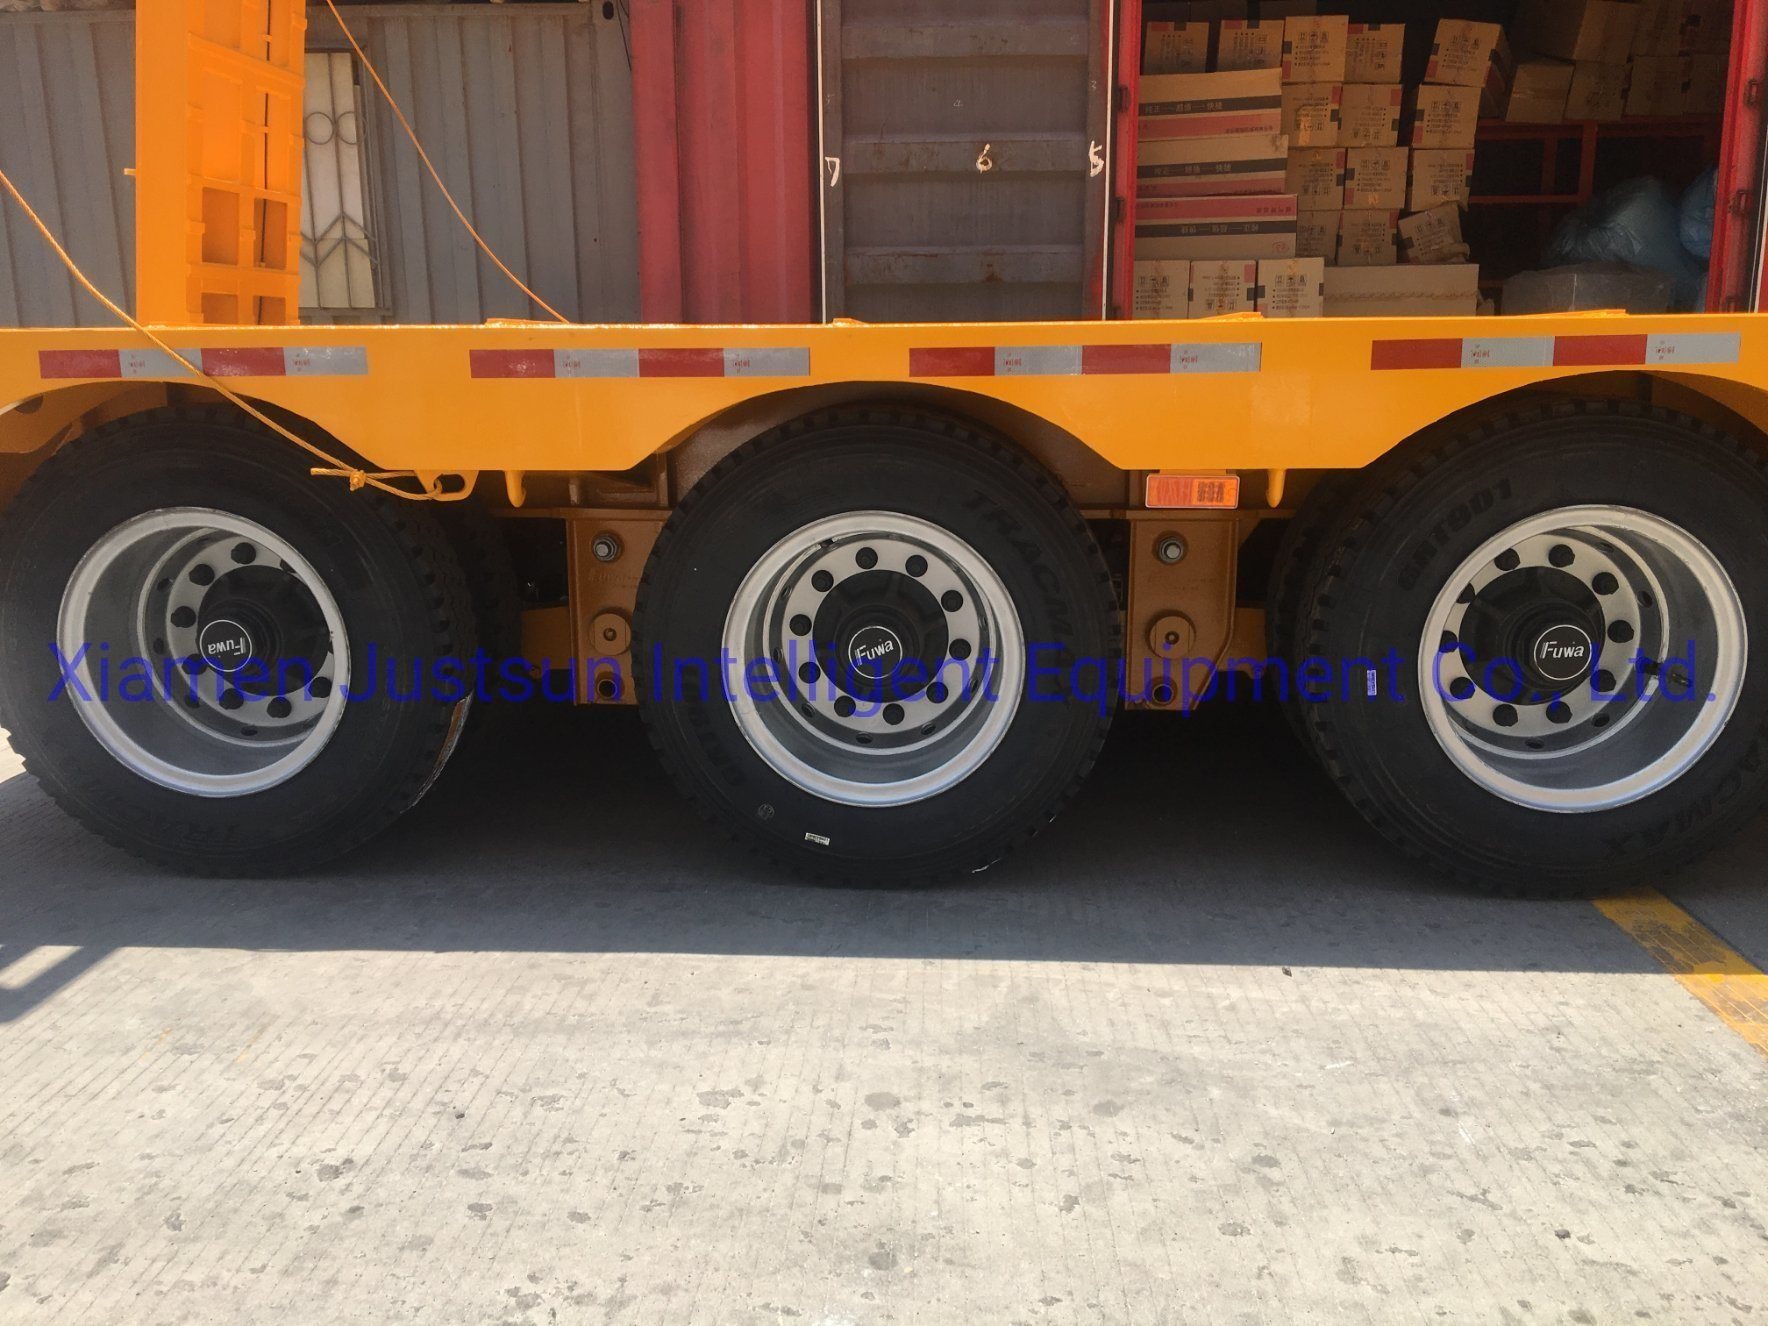 Heavy Duty Low Bed Semi Trailer with 50-120 Tons Payload